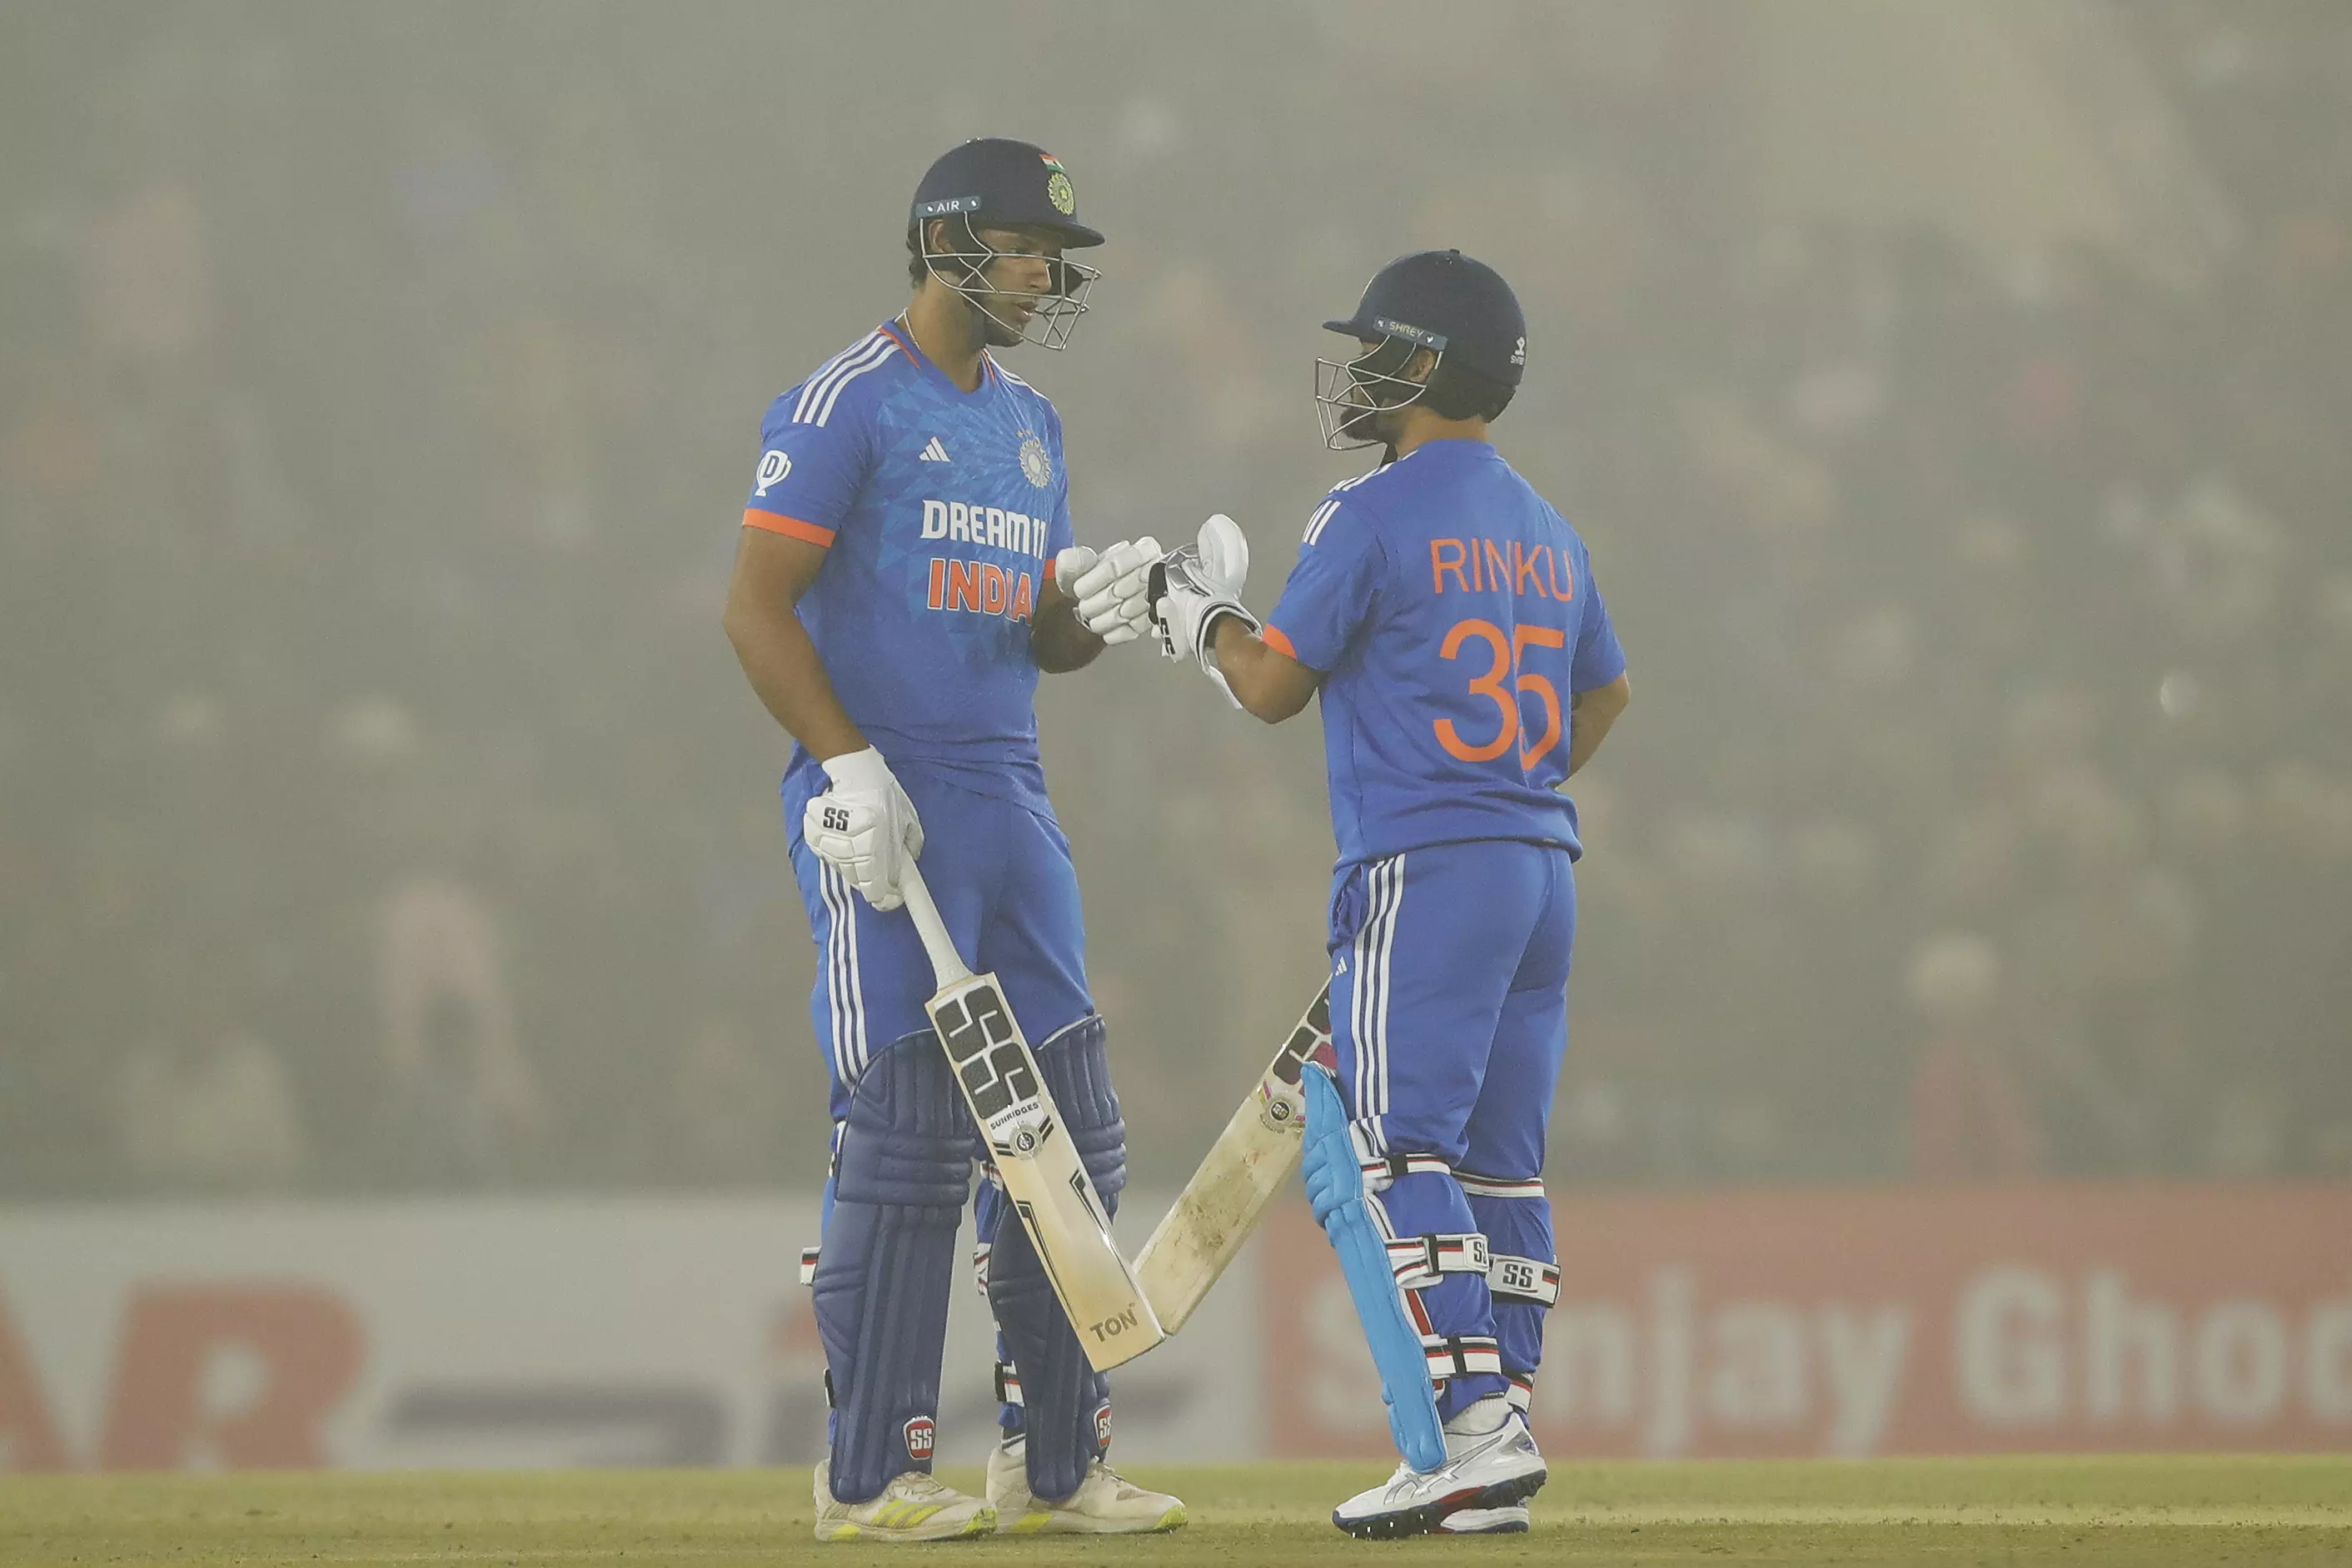 Dubey (left) ended the game in style with a straight six and four. Photo: BCCI/X